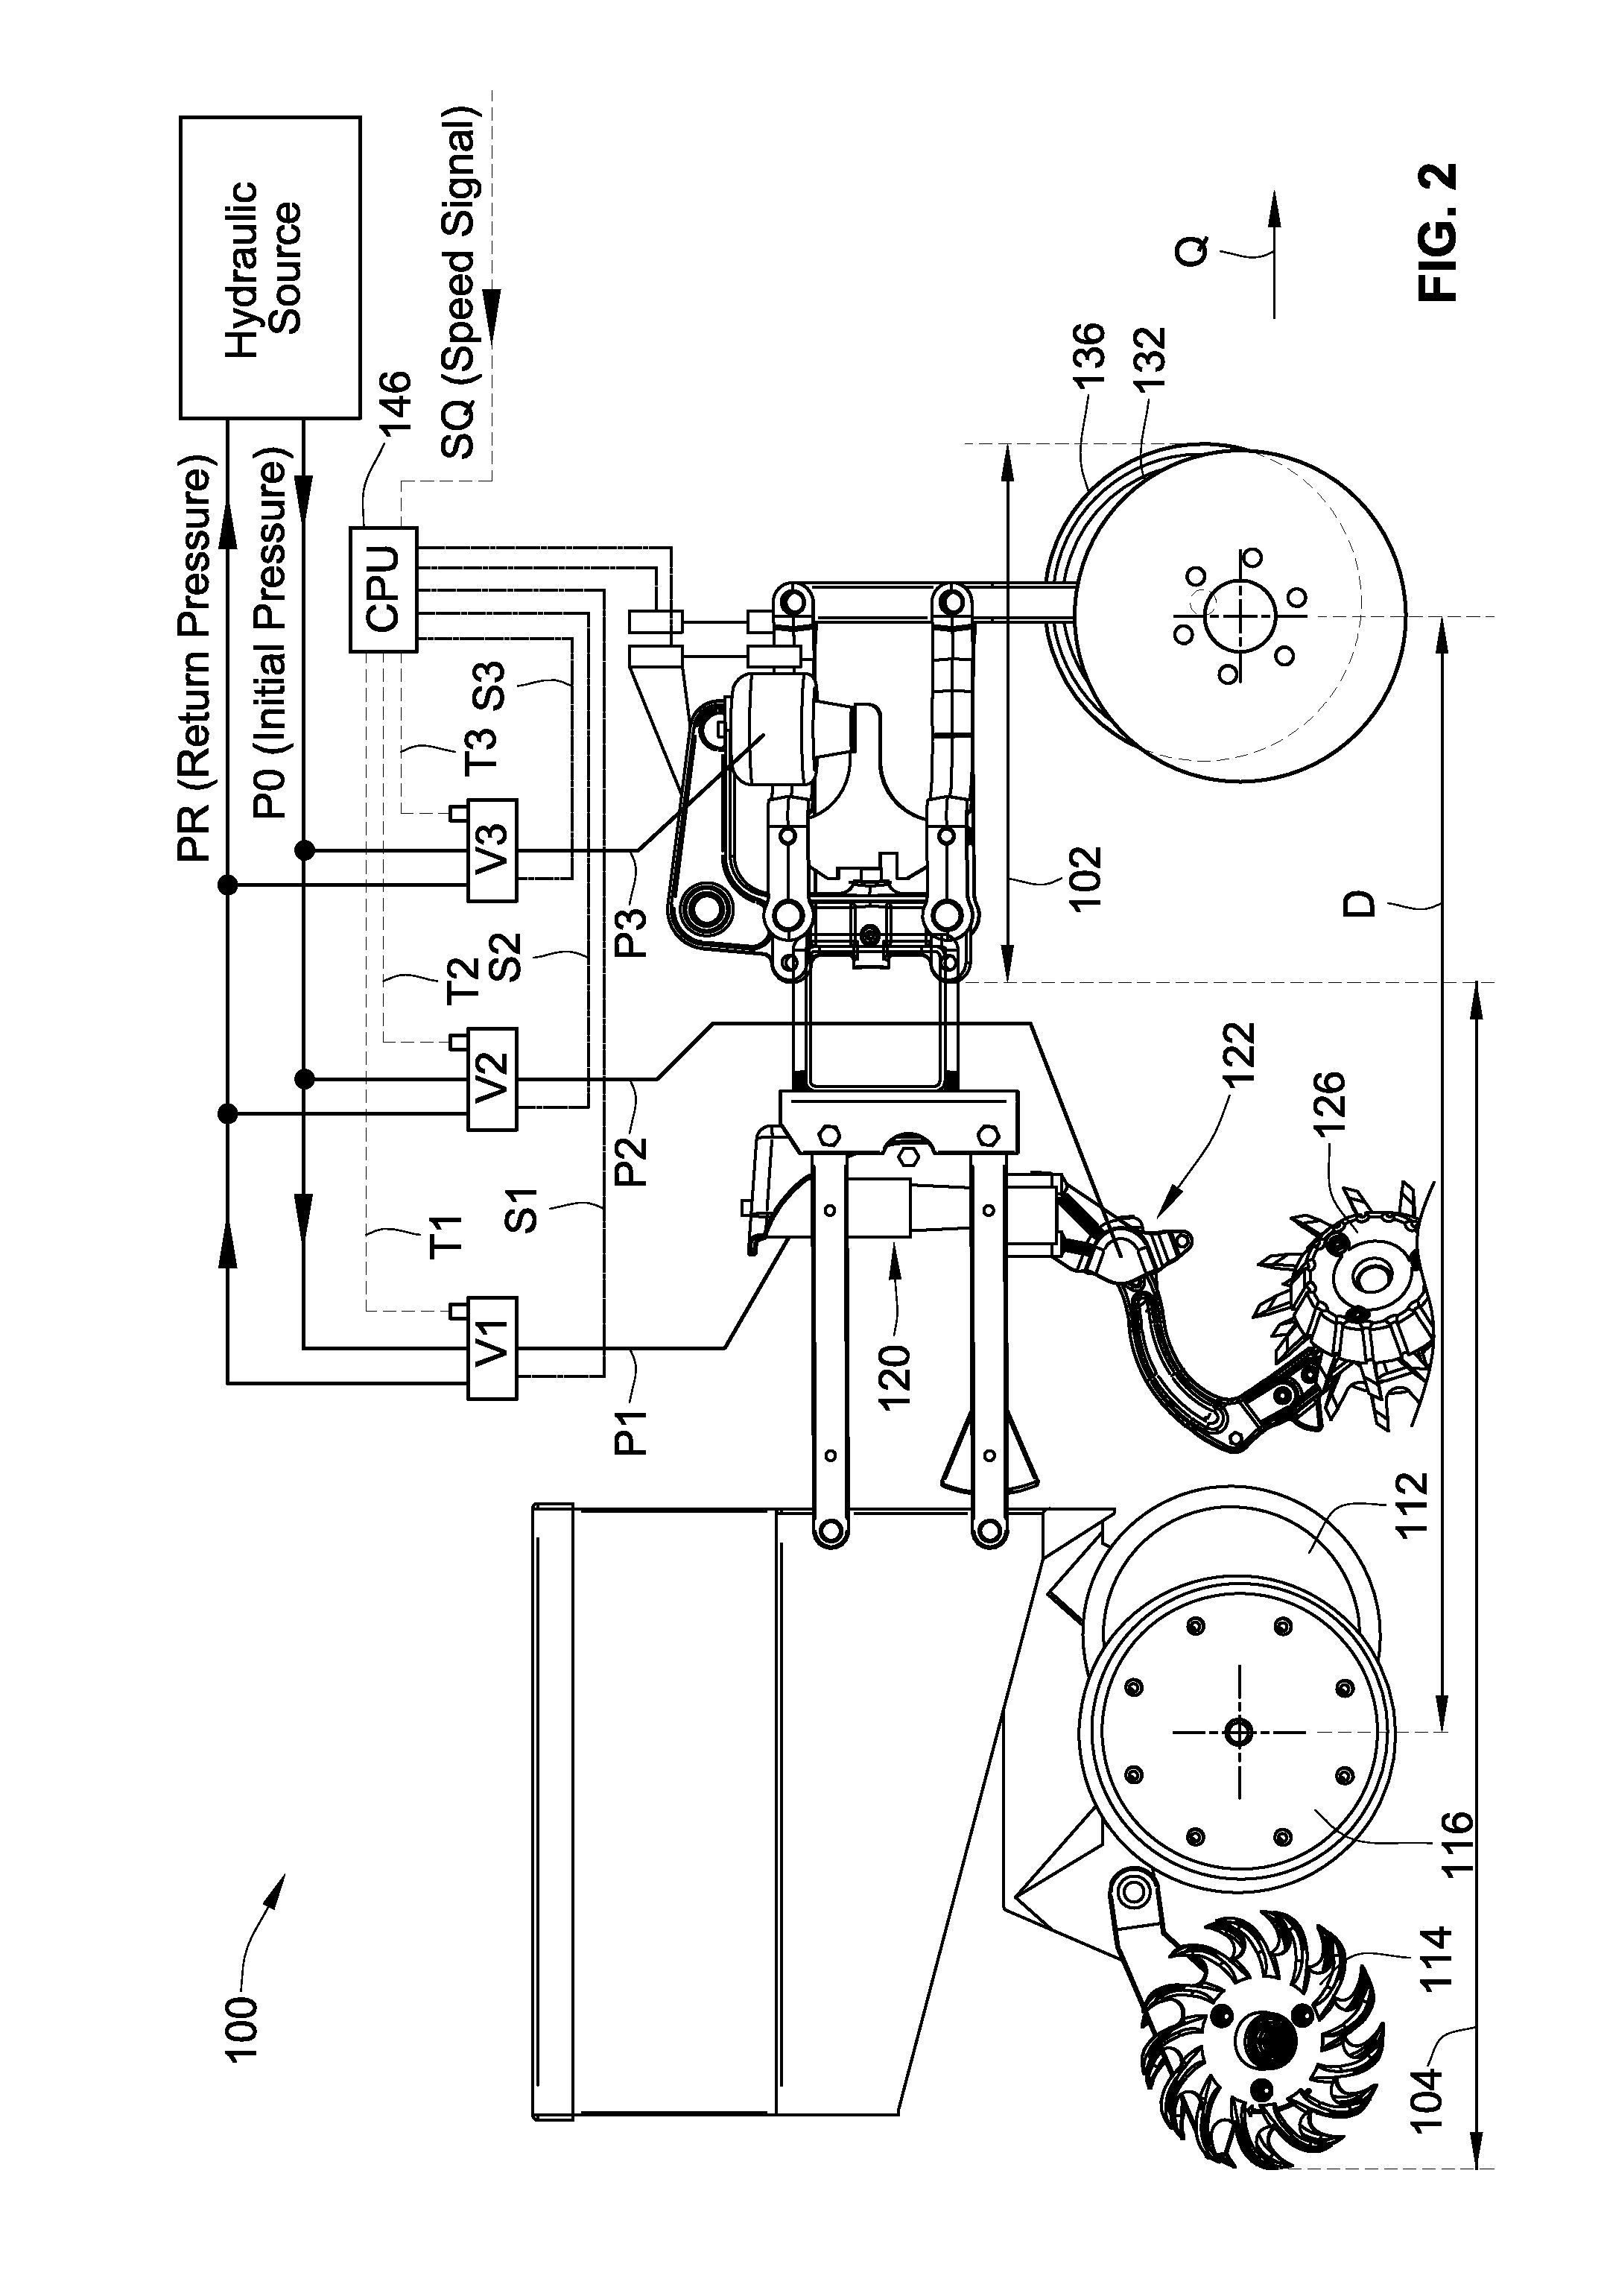 Agricultural Apparatus For Sensing And Providing Feedback Of Soil Property Changes In Real Time